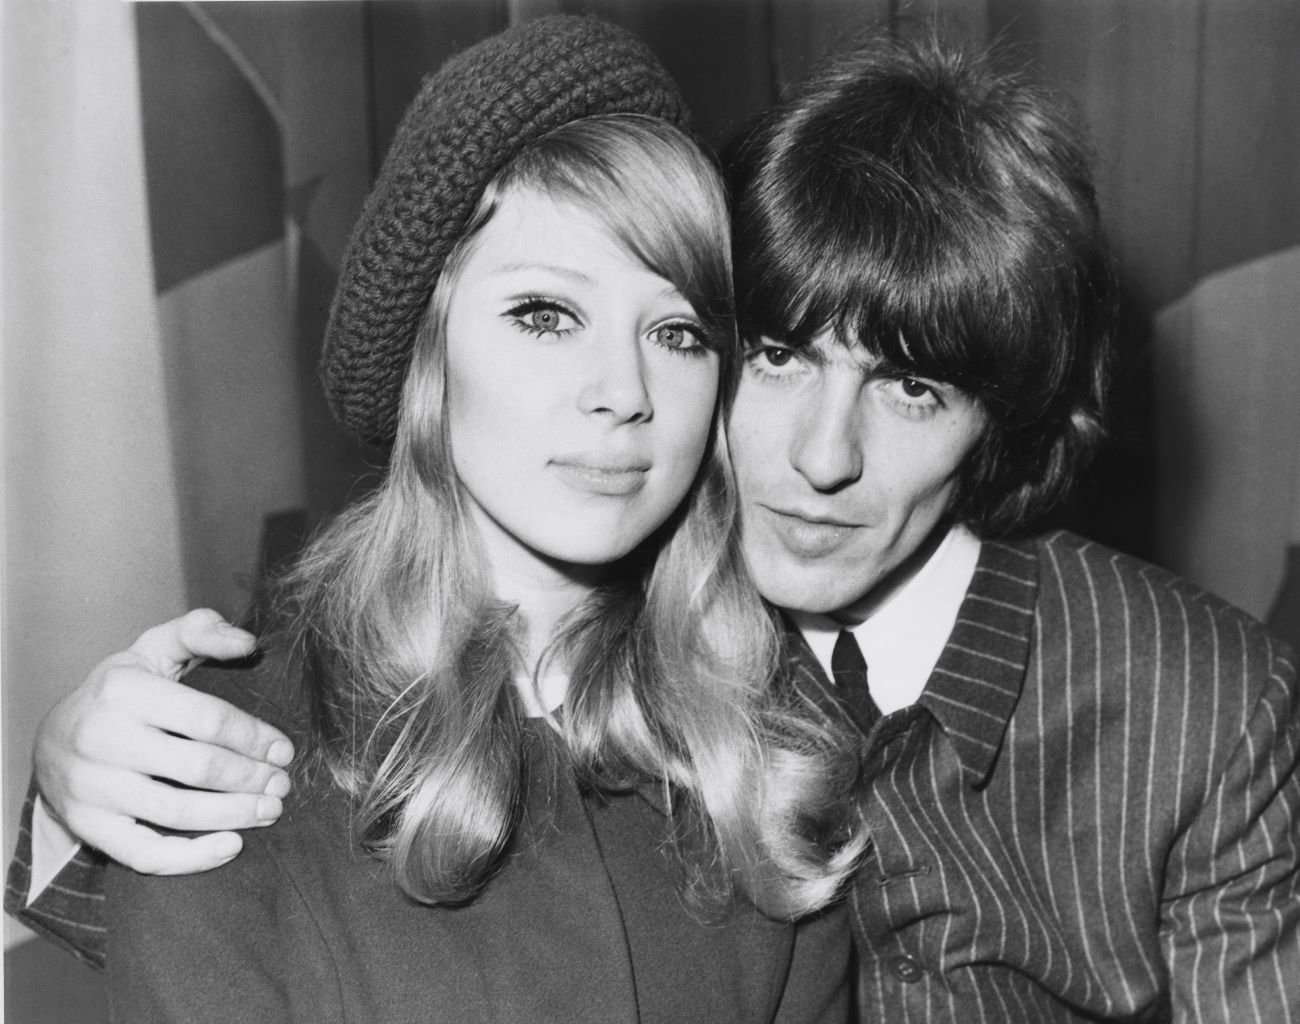 A black and white picture of George Harrison's wife Pattie Boyd with Harrison's arm around her shoulders.